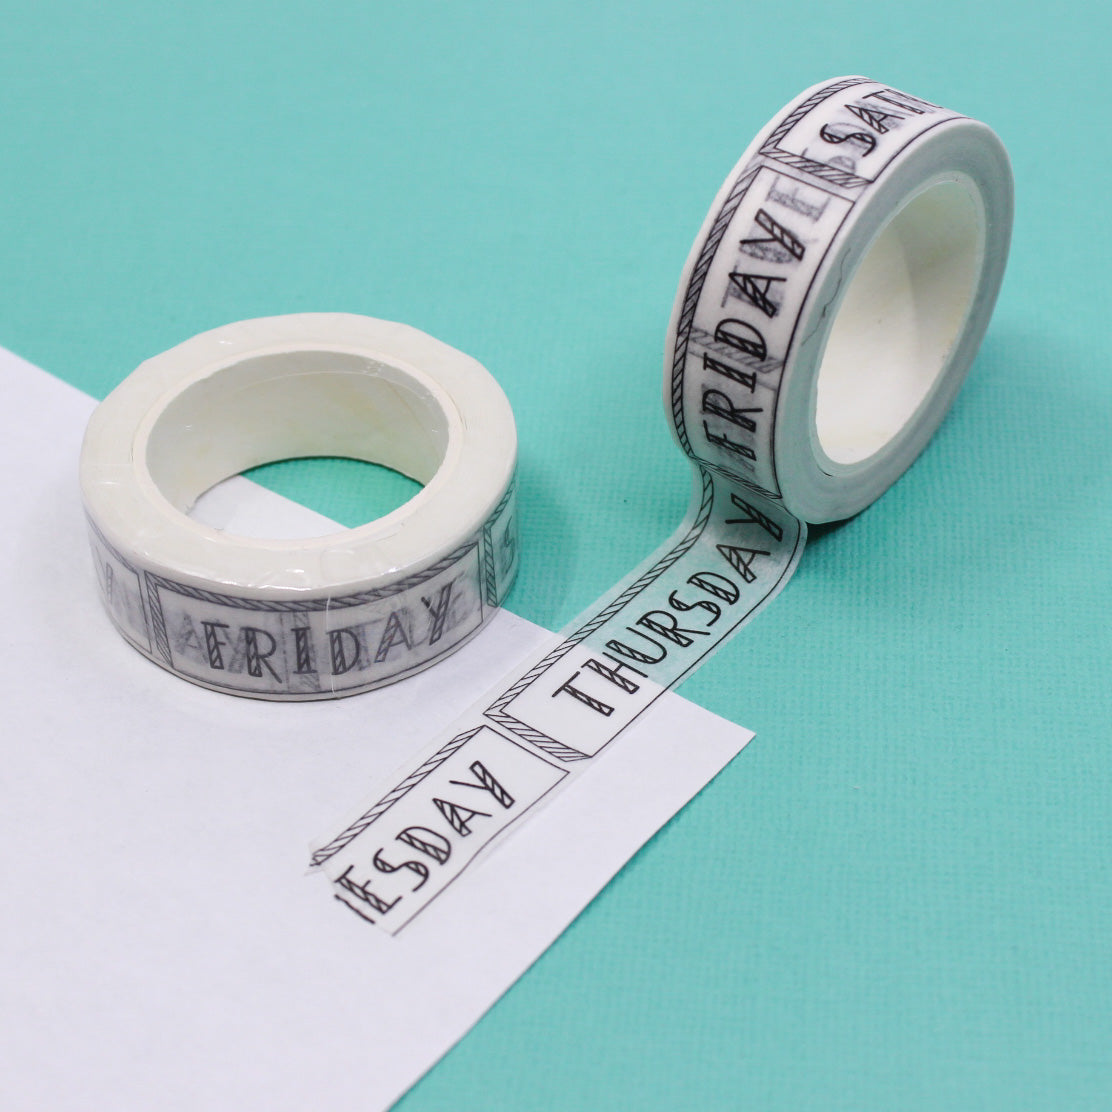 Stay organized with our Bold Black and White Days of the Week Washi Tape, featuring clear and striking text. Ideal for adding a crisp and functional touch to your planner or calendar. This tape is sold at BBB Supplies Craft Shop.